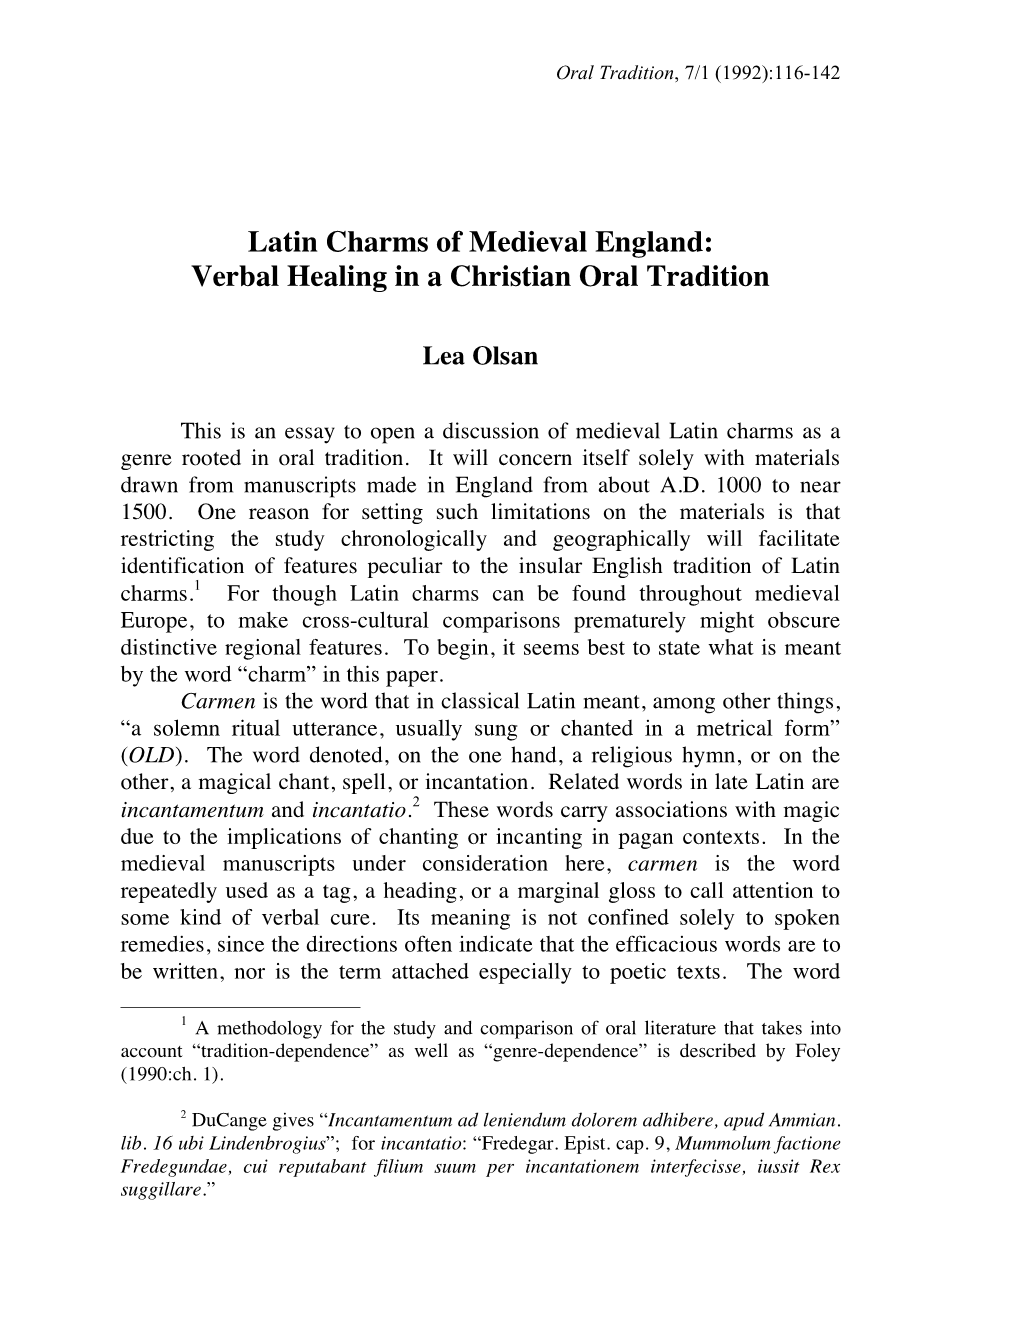 Latin Charms of Medieval England: Verbal Healing in a Christian Oral Tradition